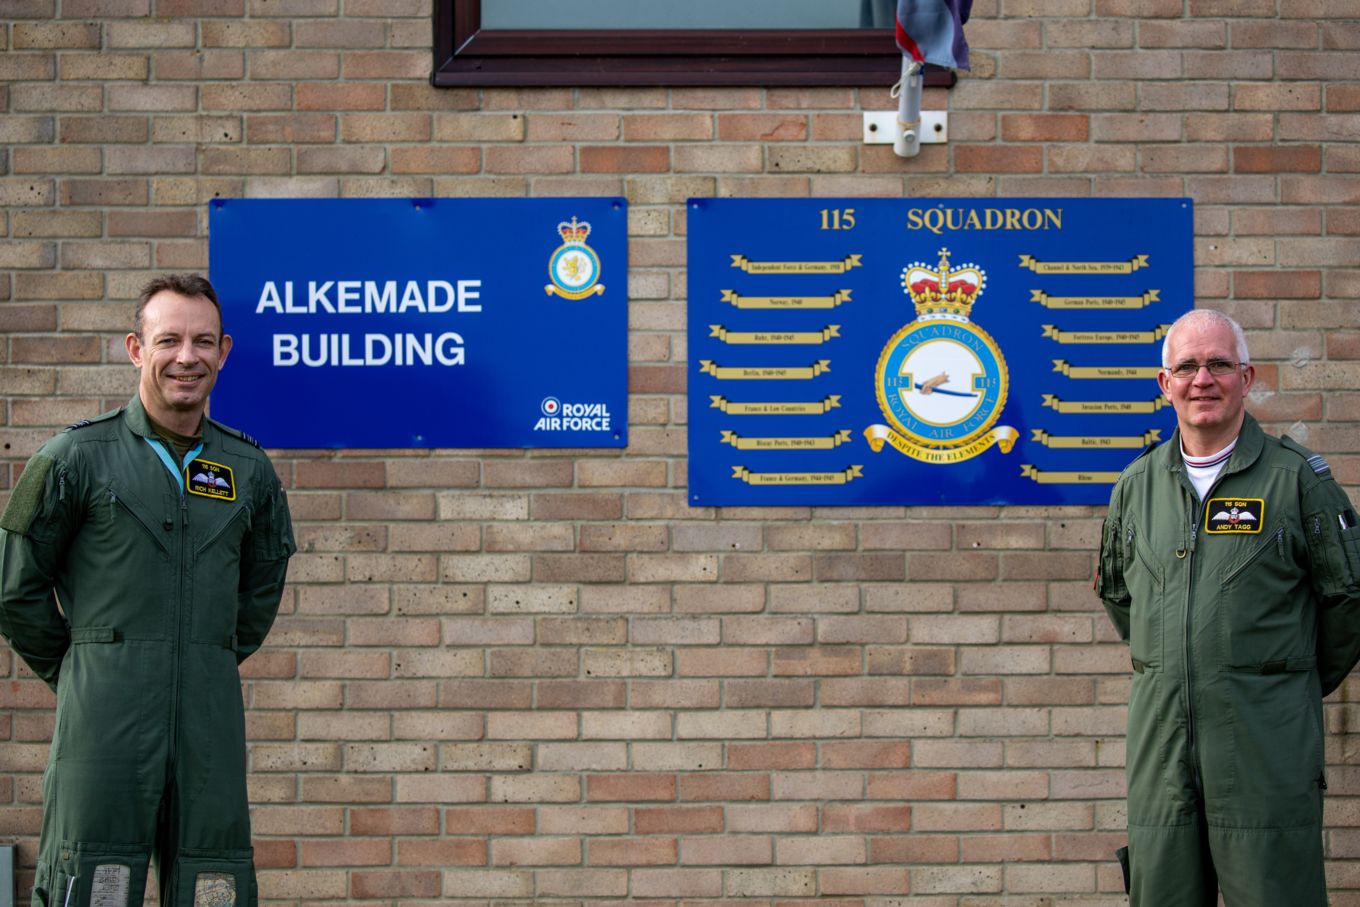 Squadron Leader Rich Kellet (left) takes over 115 Squadron from Squadron Leader Andy Tagg (right)